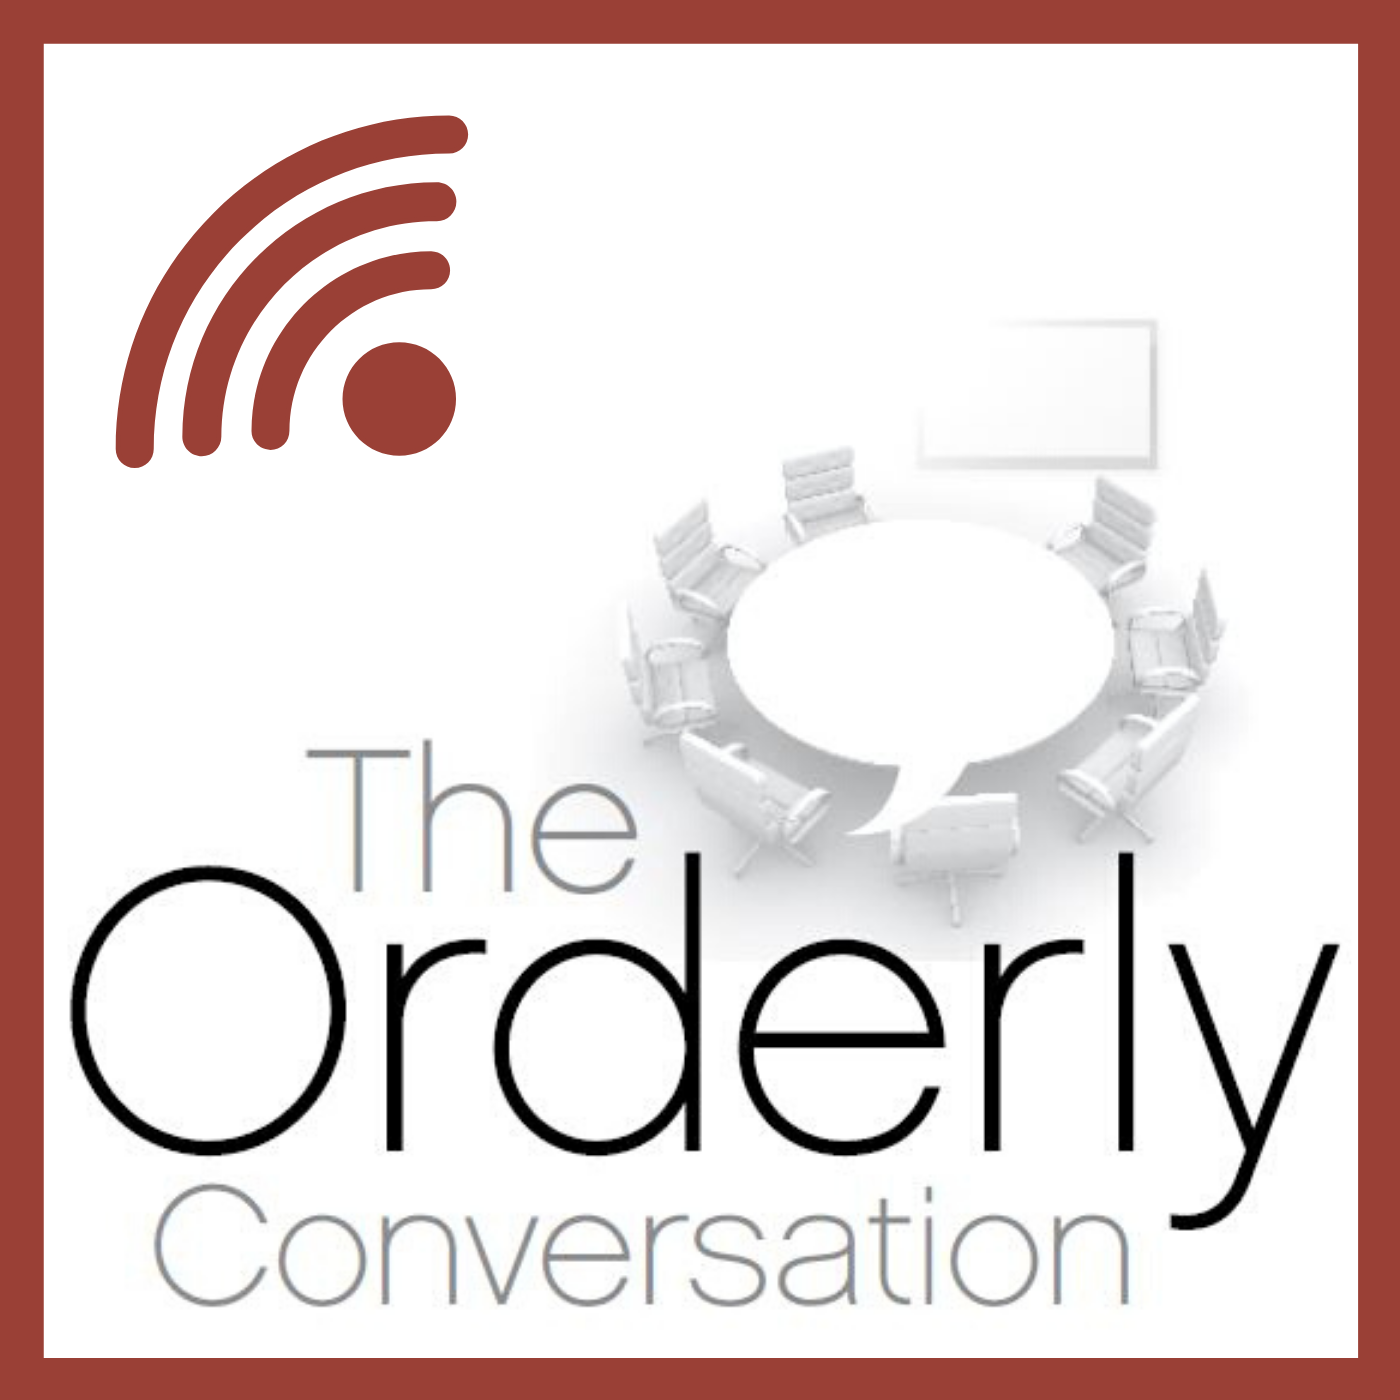 Podcast about the Orderly Conversation